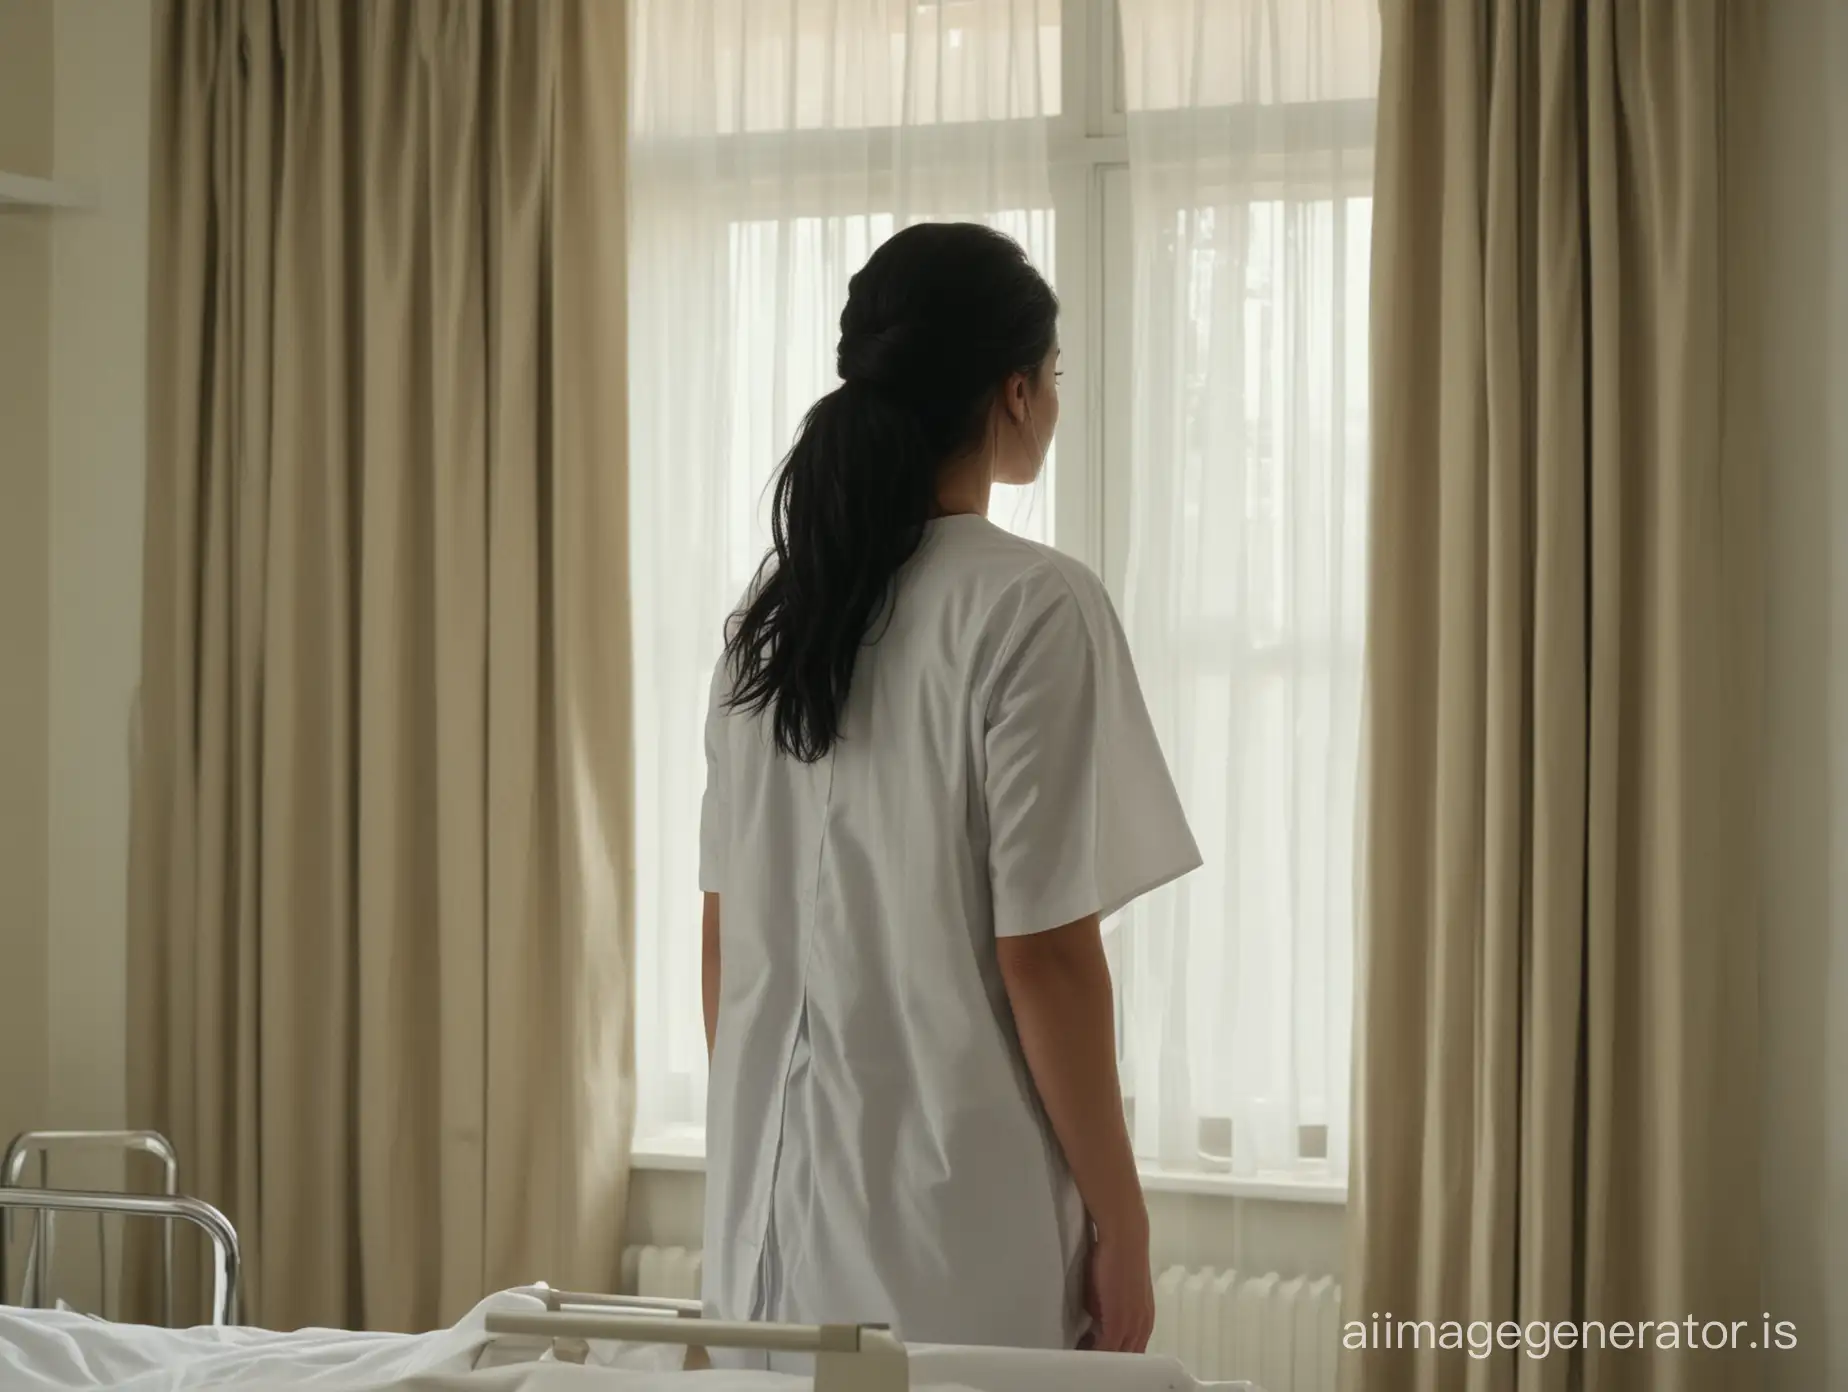 Hospital ward. The shot focuses on the Nurse - she stands with her back to the audience, near the window, - and opens the curtains of the hospital window. Description of the nurse: a 21-year-old girl, with long black hair styled in a bun, wearing a medical gown.